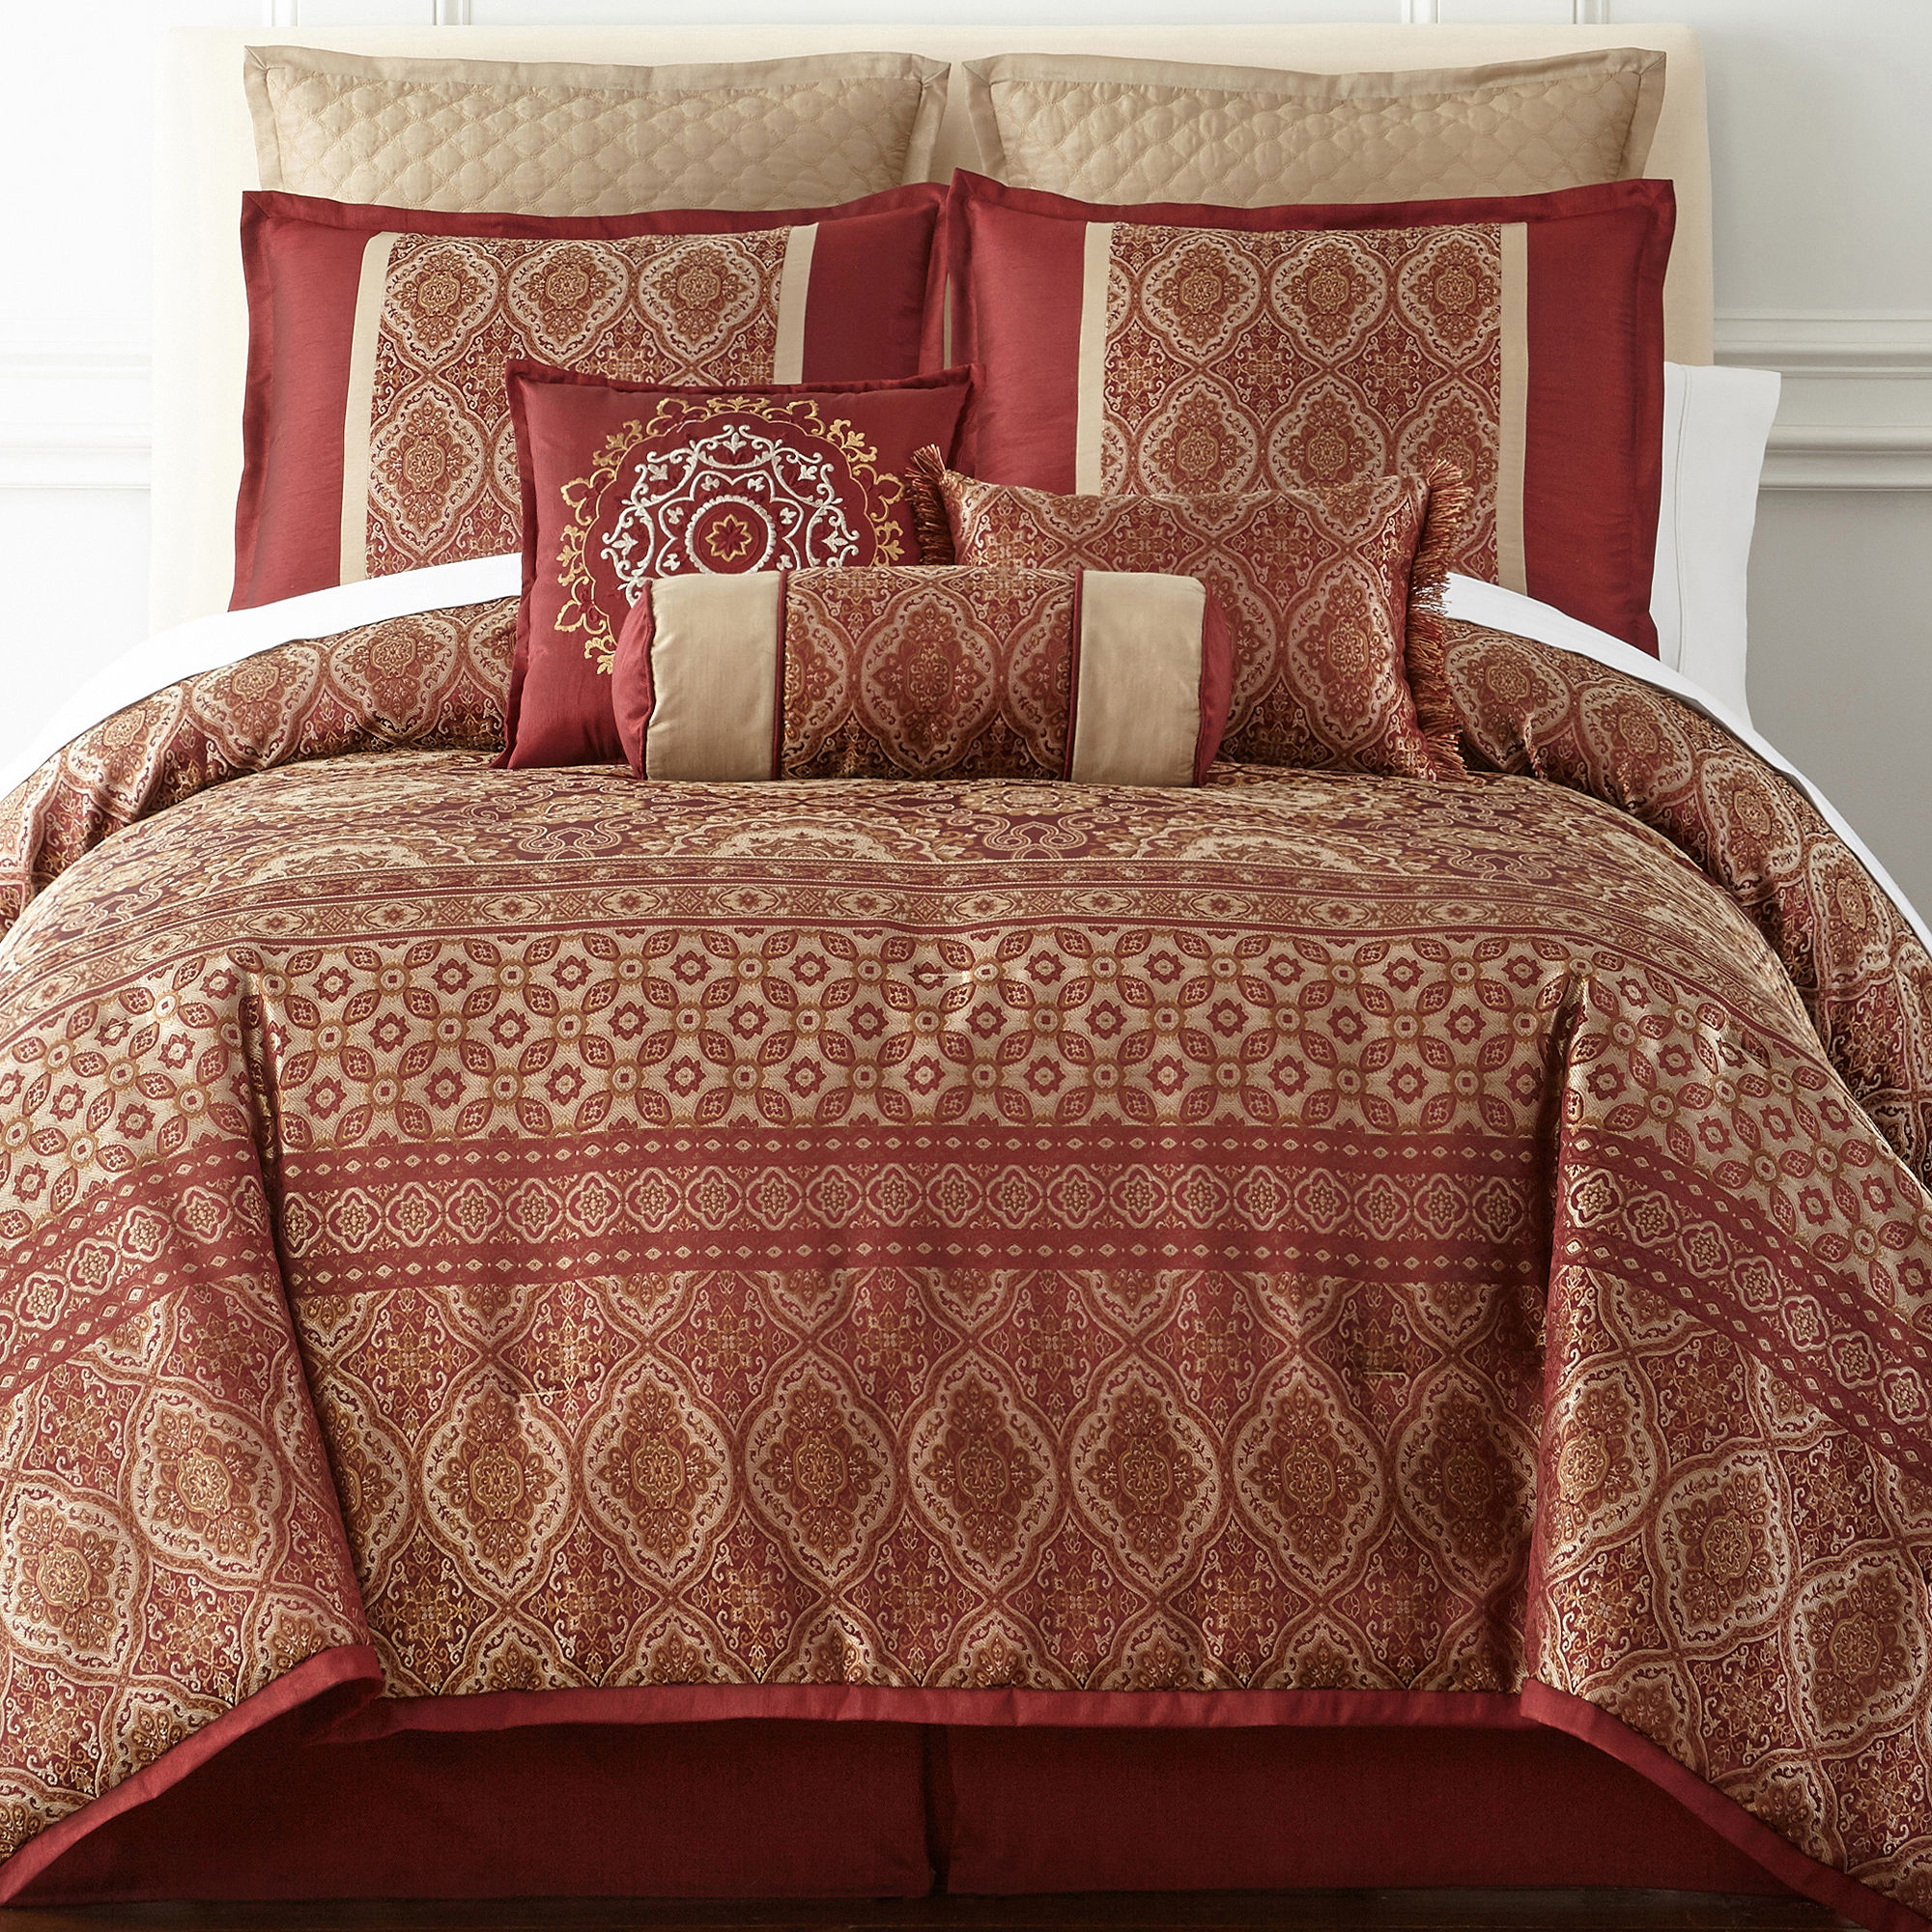 Home Expressions Allure 7-pc. Comforter Set